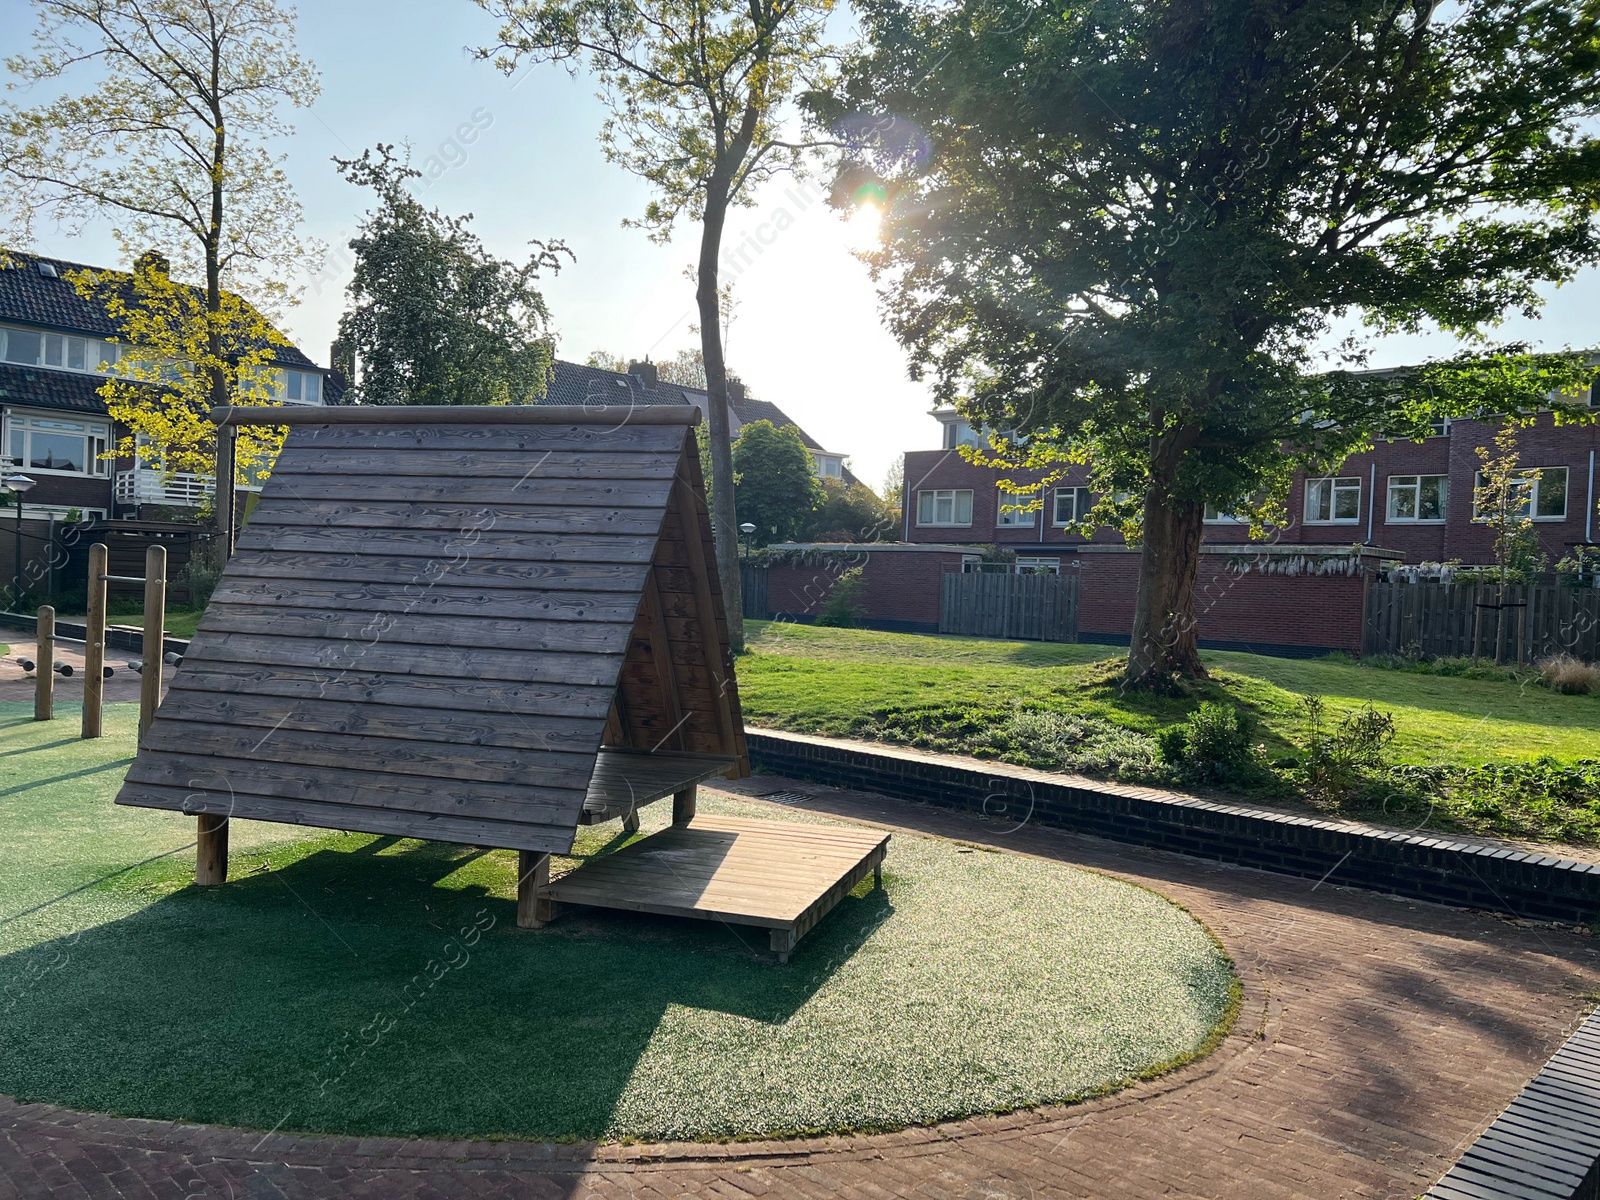 Photo of Outdoor playground for children with small wooden house on sunny day